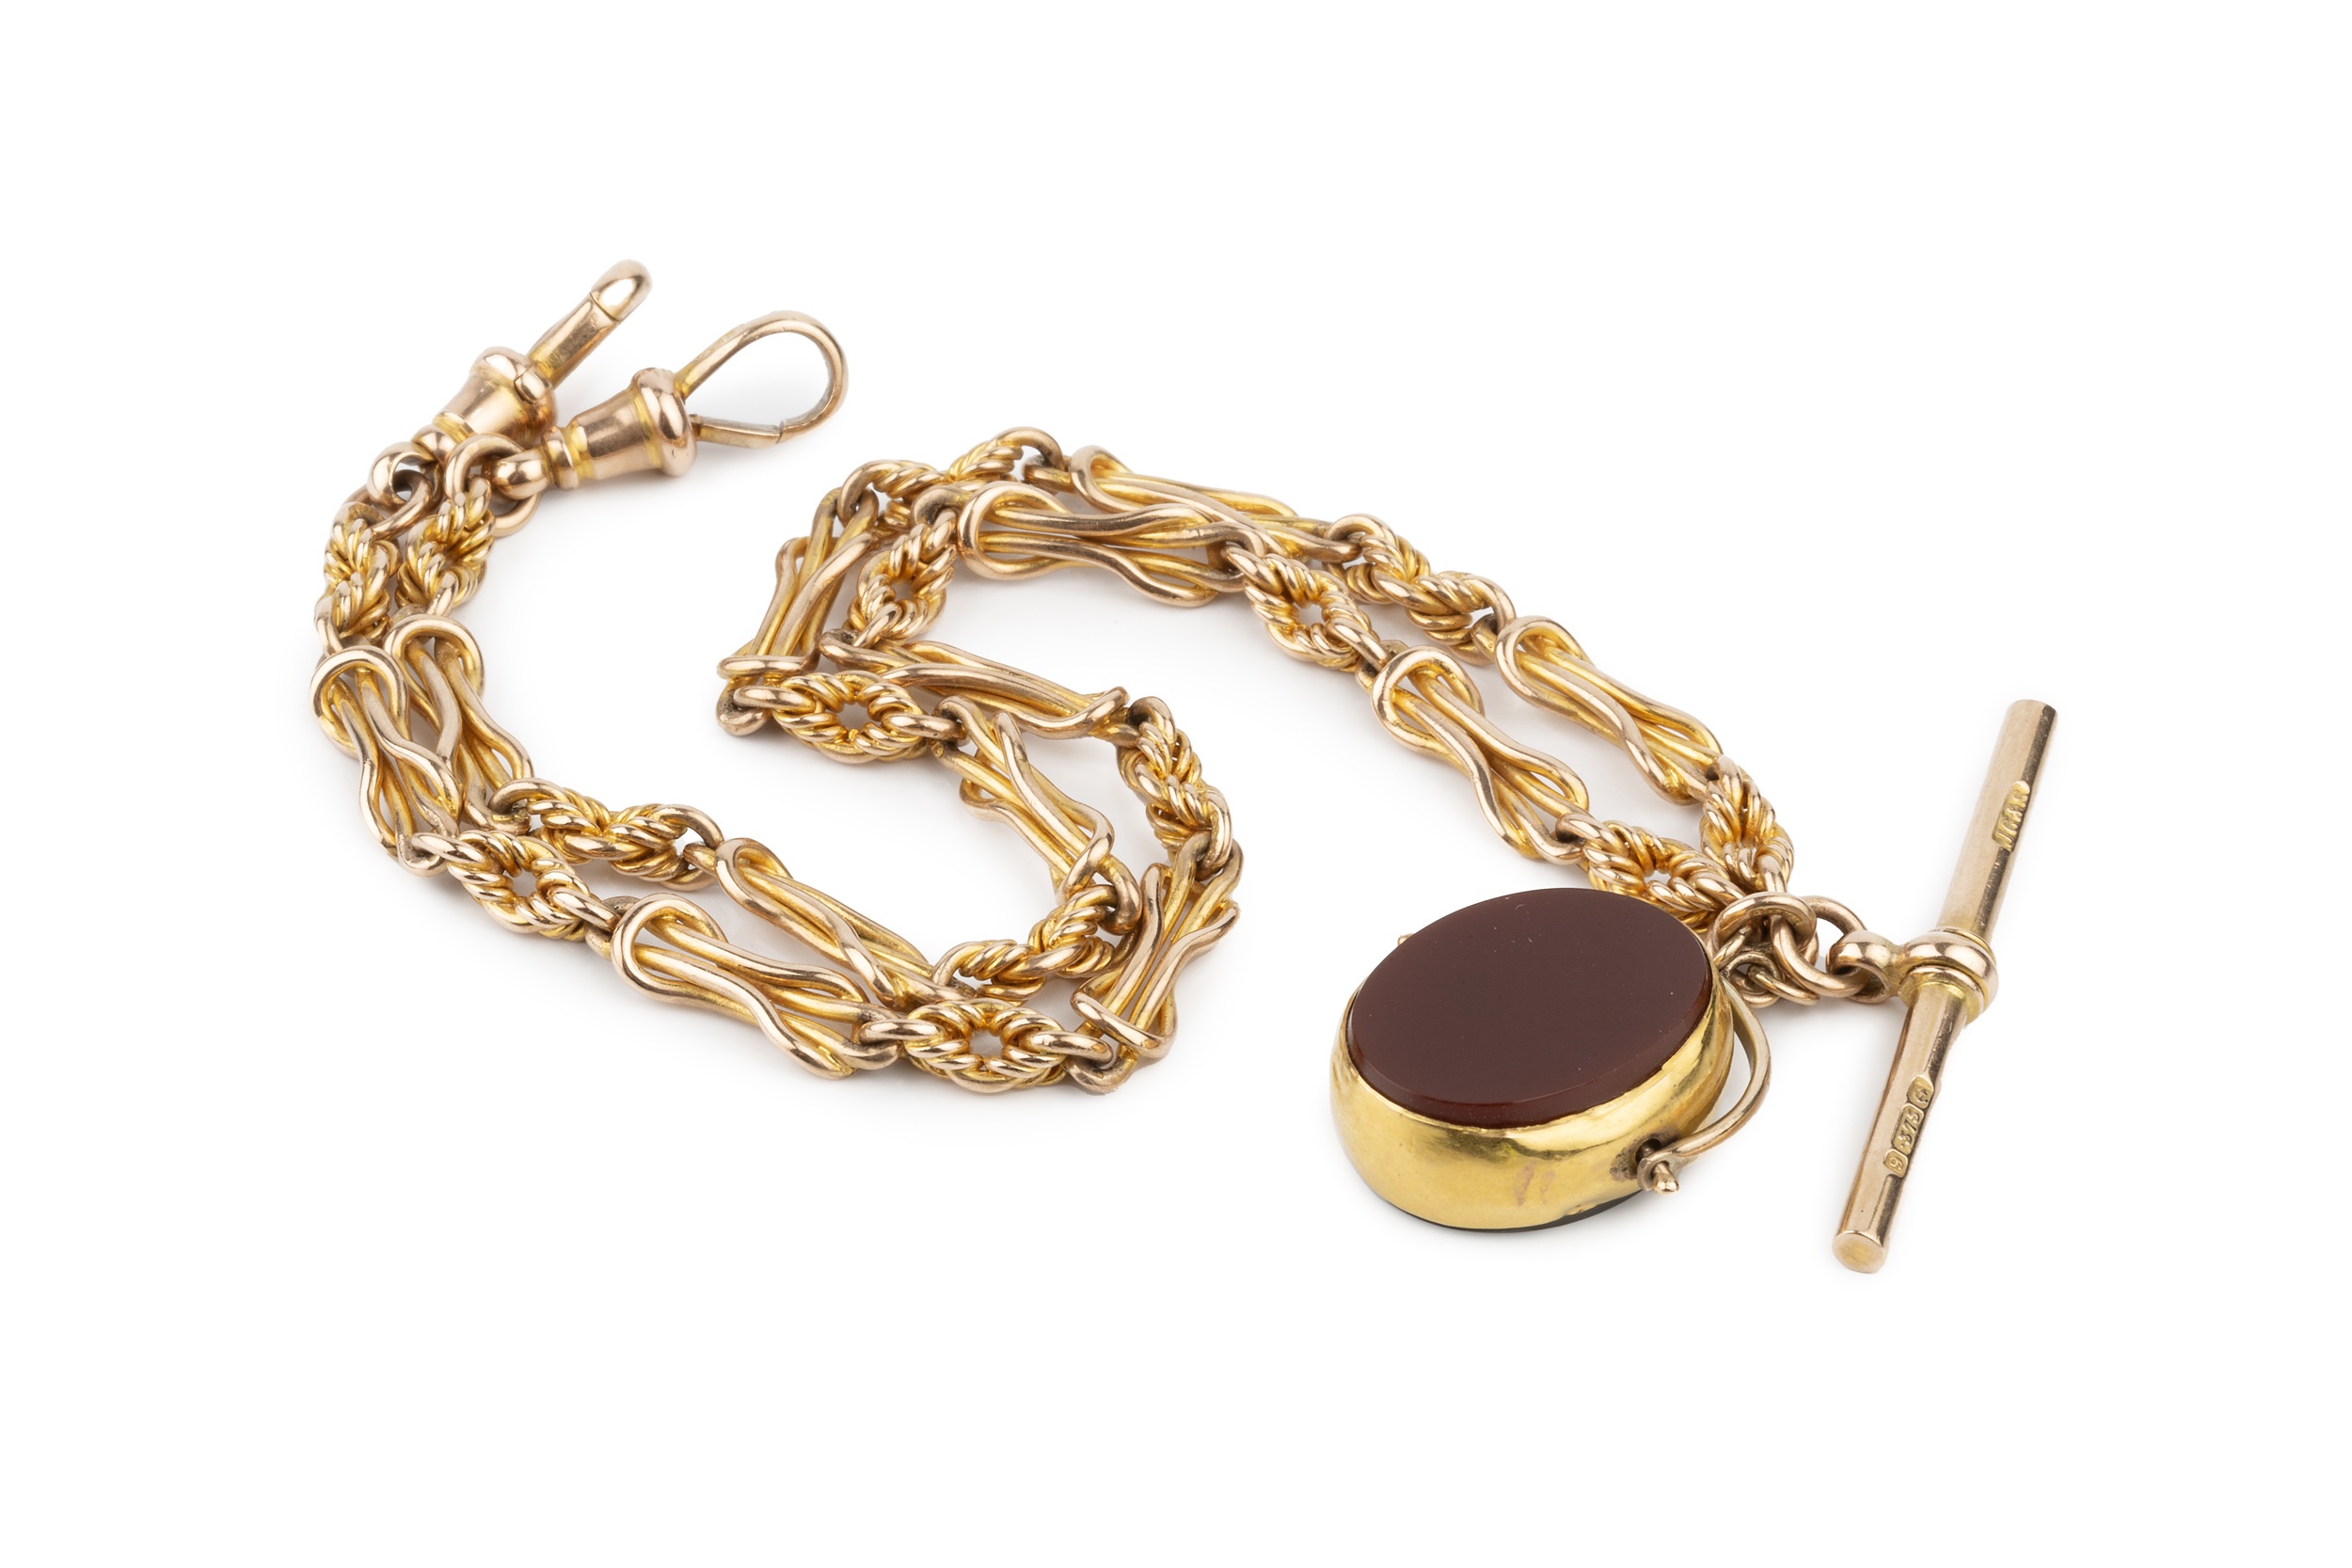 A 9ct gold double Albert watch chain, marked for J G & S, Birmingham (undated), featuring fancy link